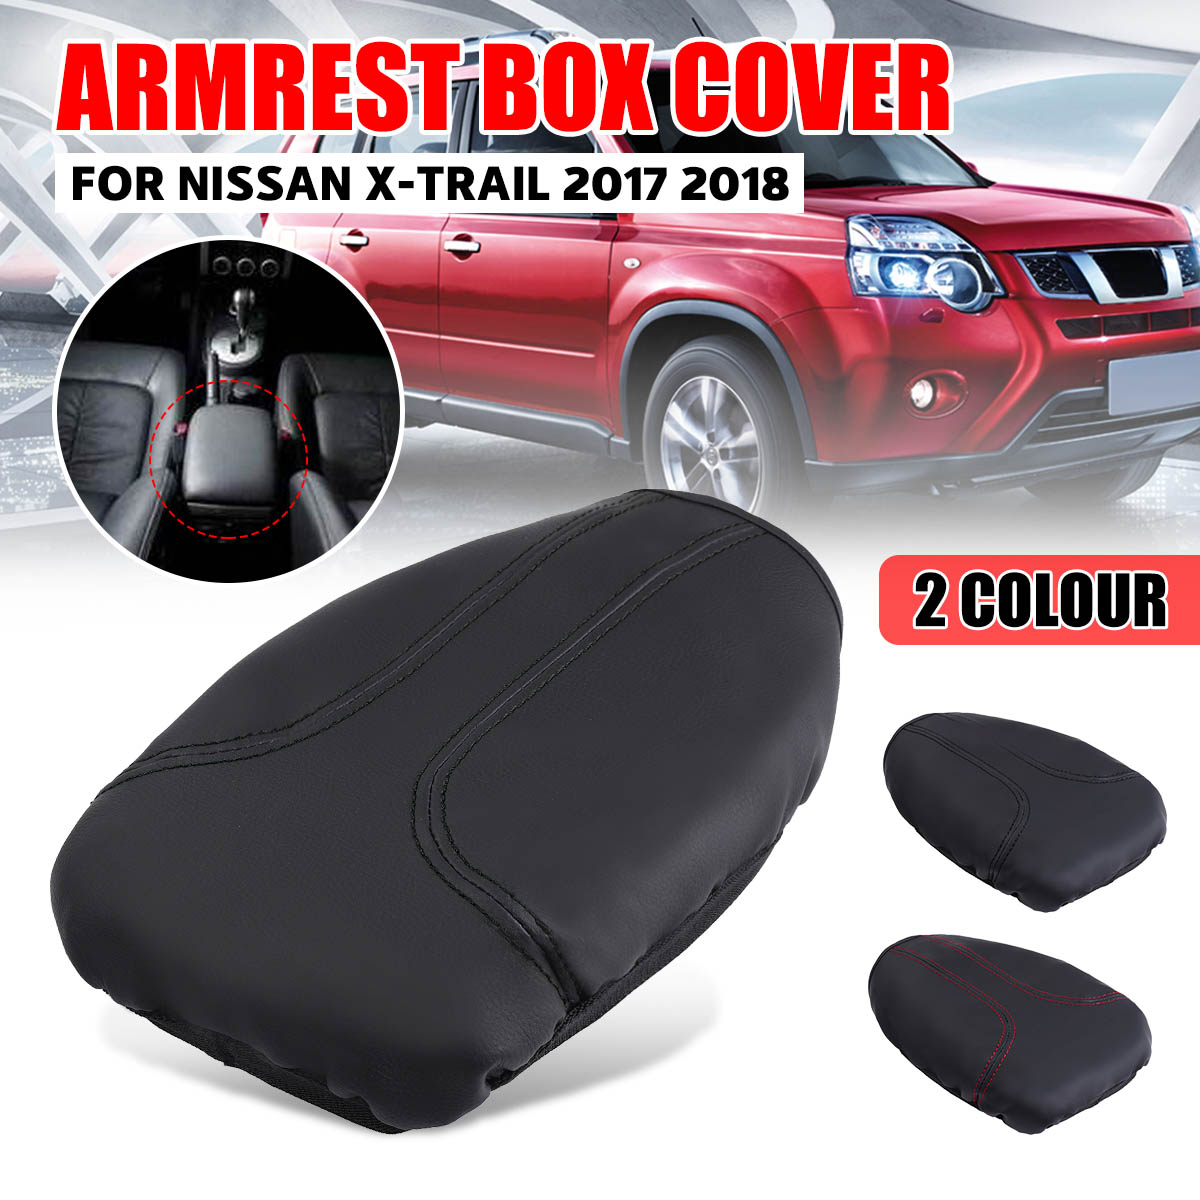 PU-Leather-Car-Console-Center-Arm-Rest-Cover-Cushion-for-Nissan-X-Trail-17-18-1401017